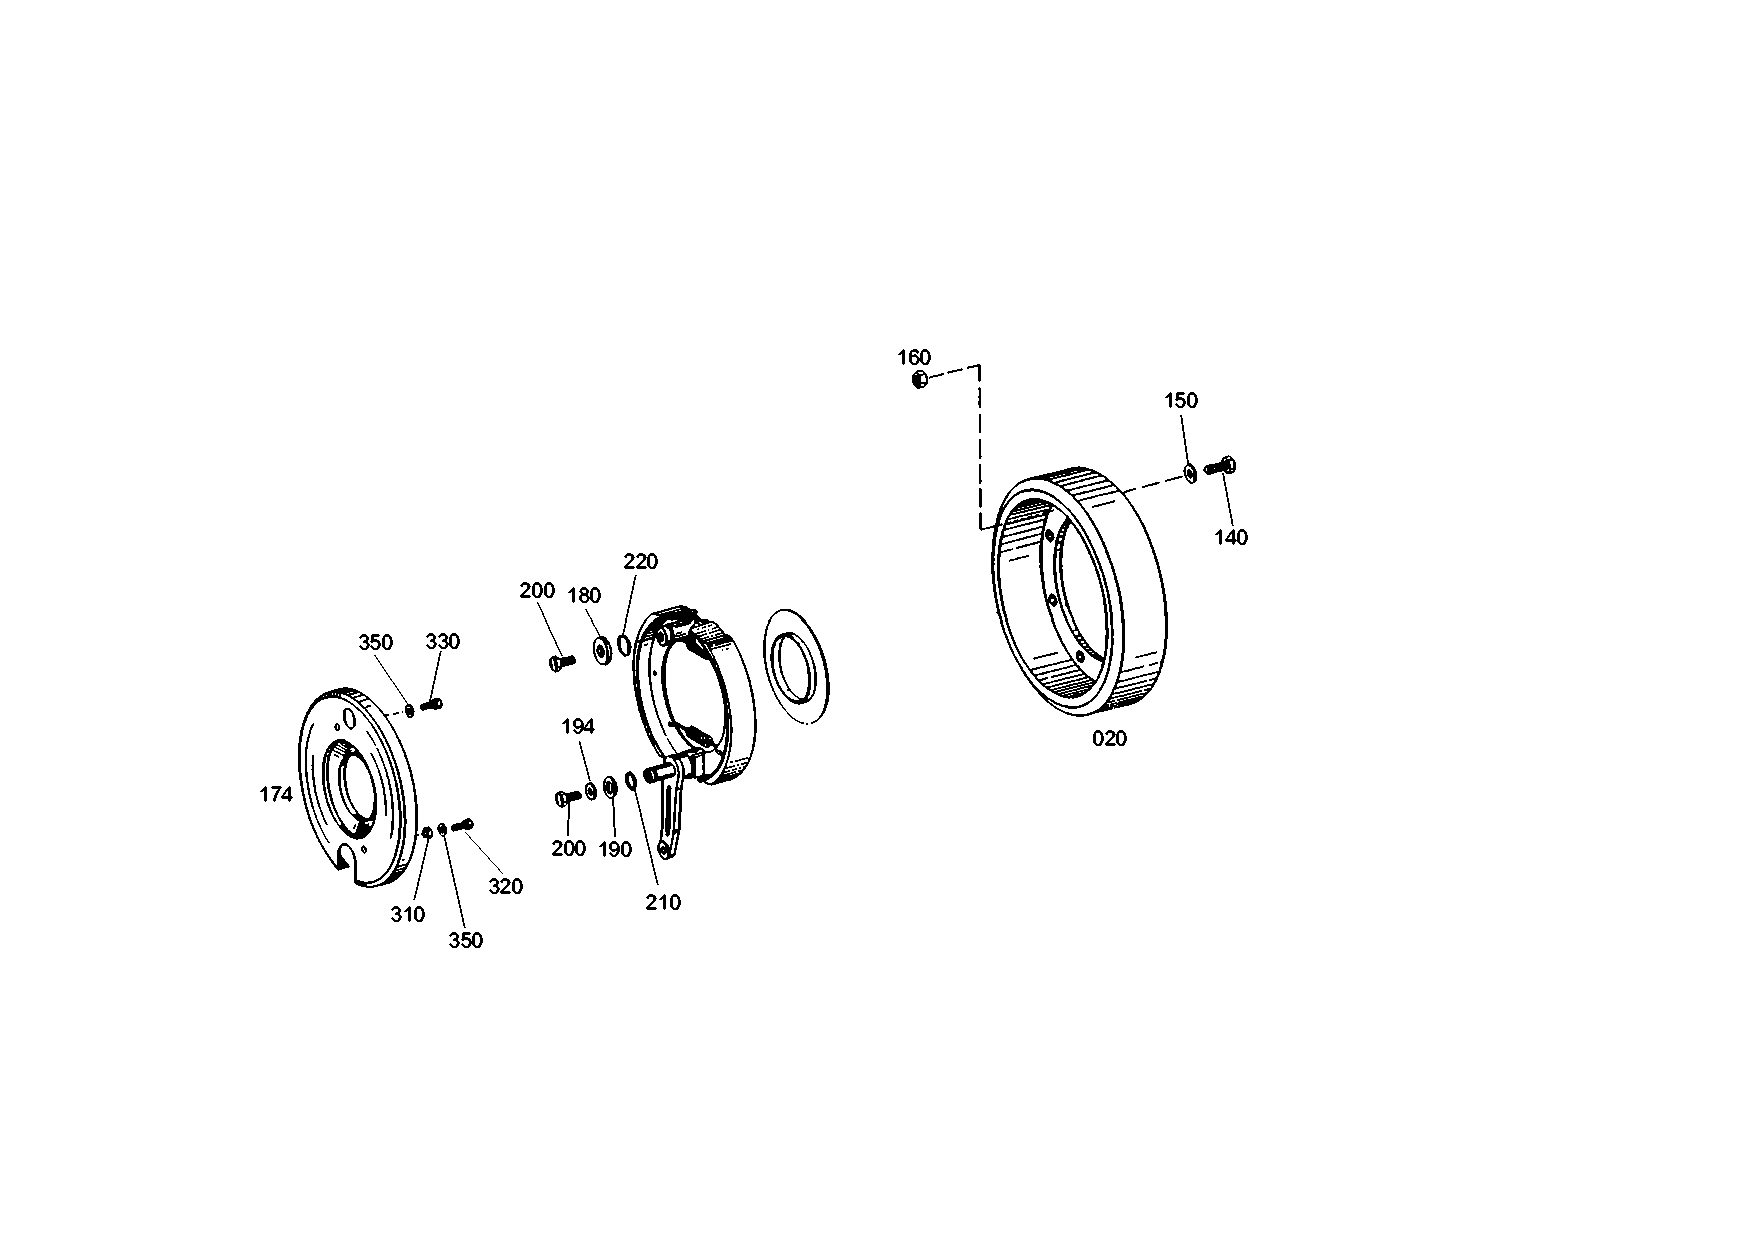 drawing for CNH NEW HOLLAND S300590 - BRAKE BLOCK (figure 5)